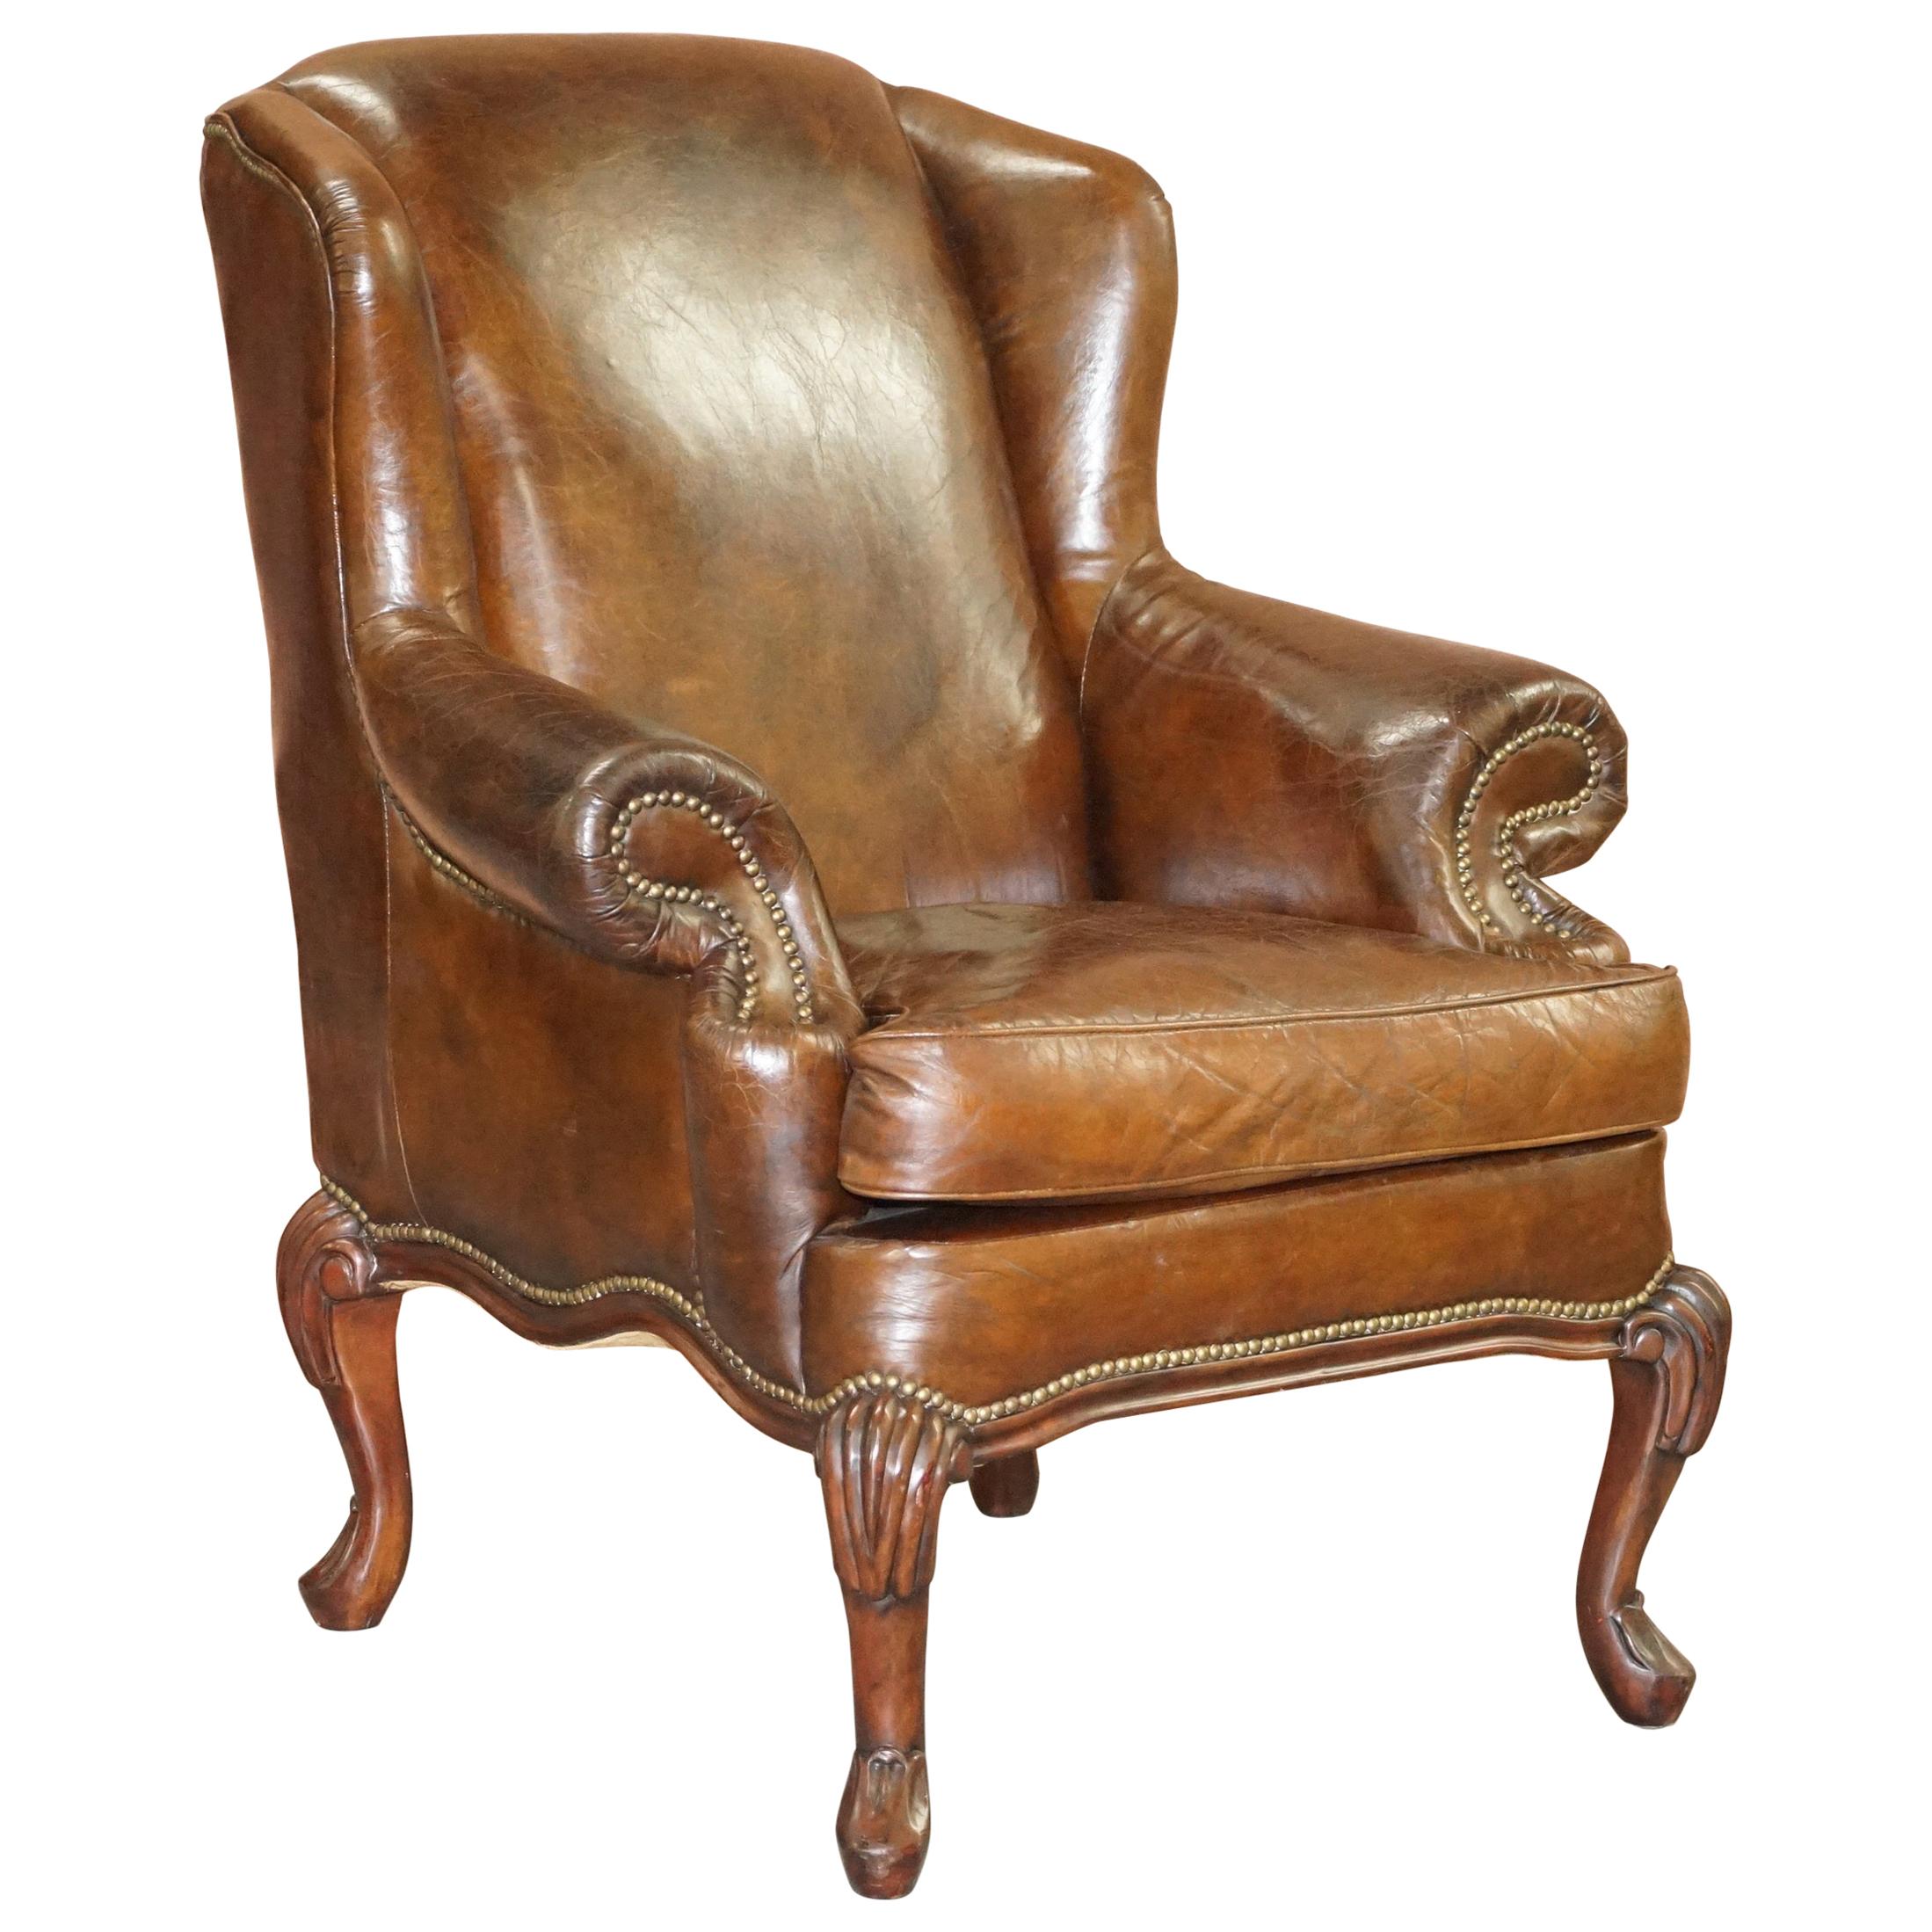 Stunning Heritage Vintage Aged Brown Leather Wingback Armchair Carved Legs